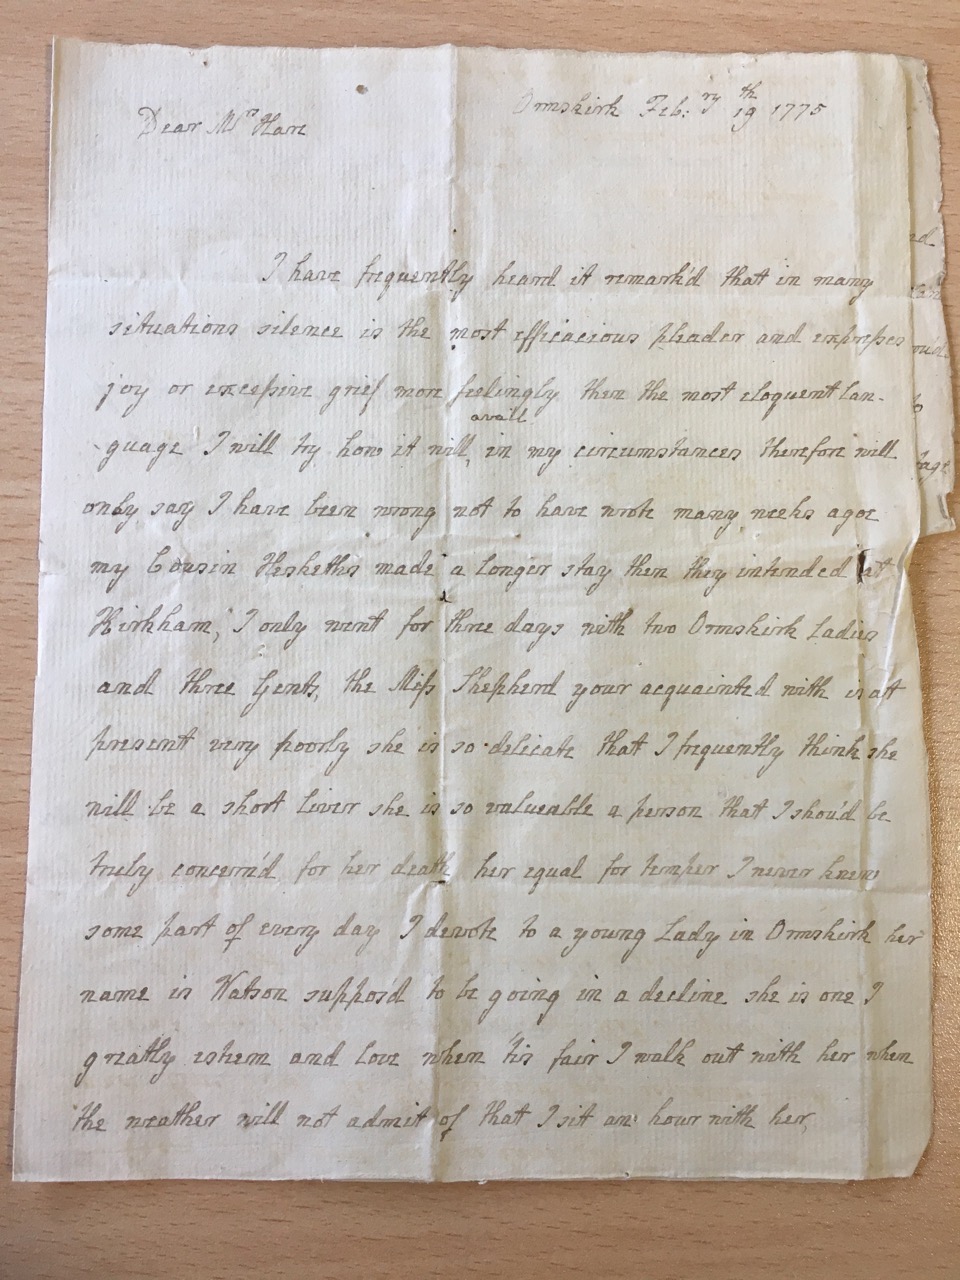 Image #1 of letter: J[enny] Brownsword to Ann Hare, 19 February 1775